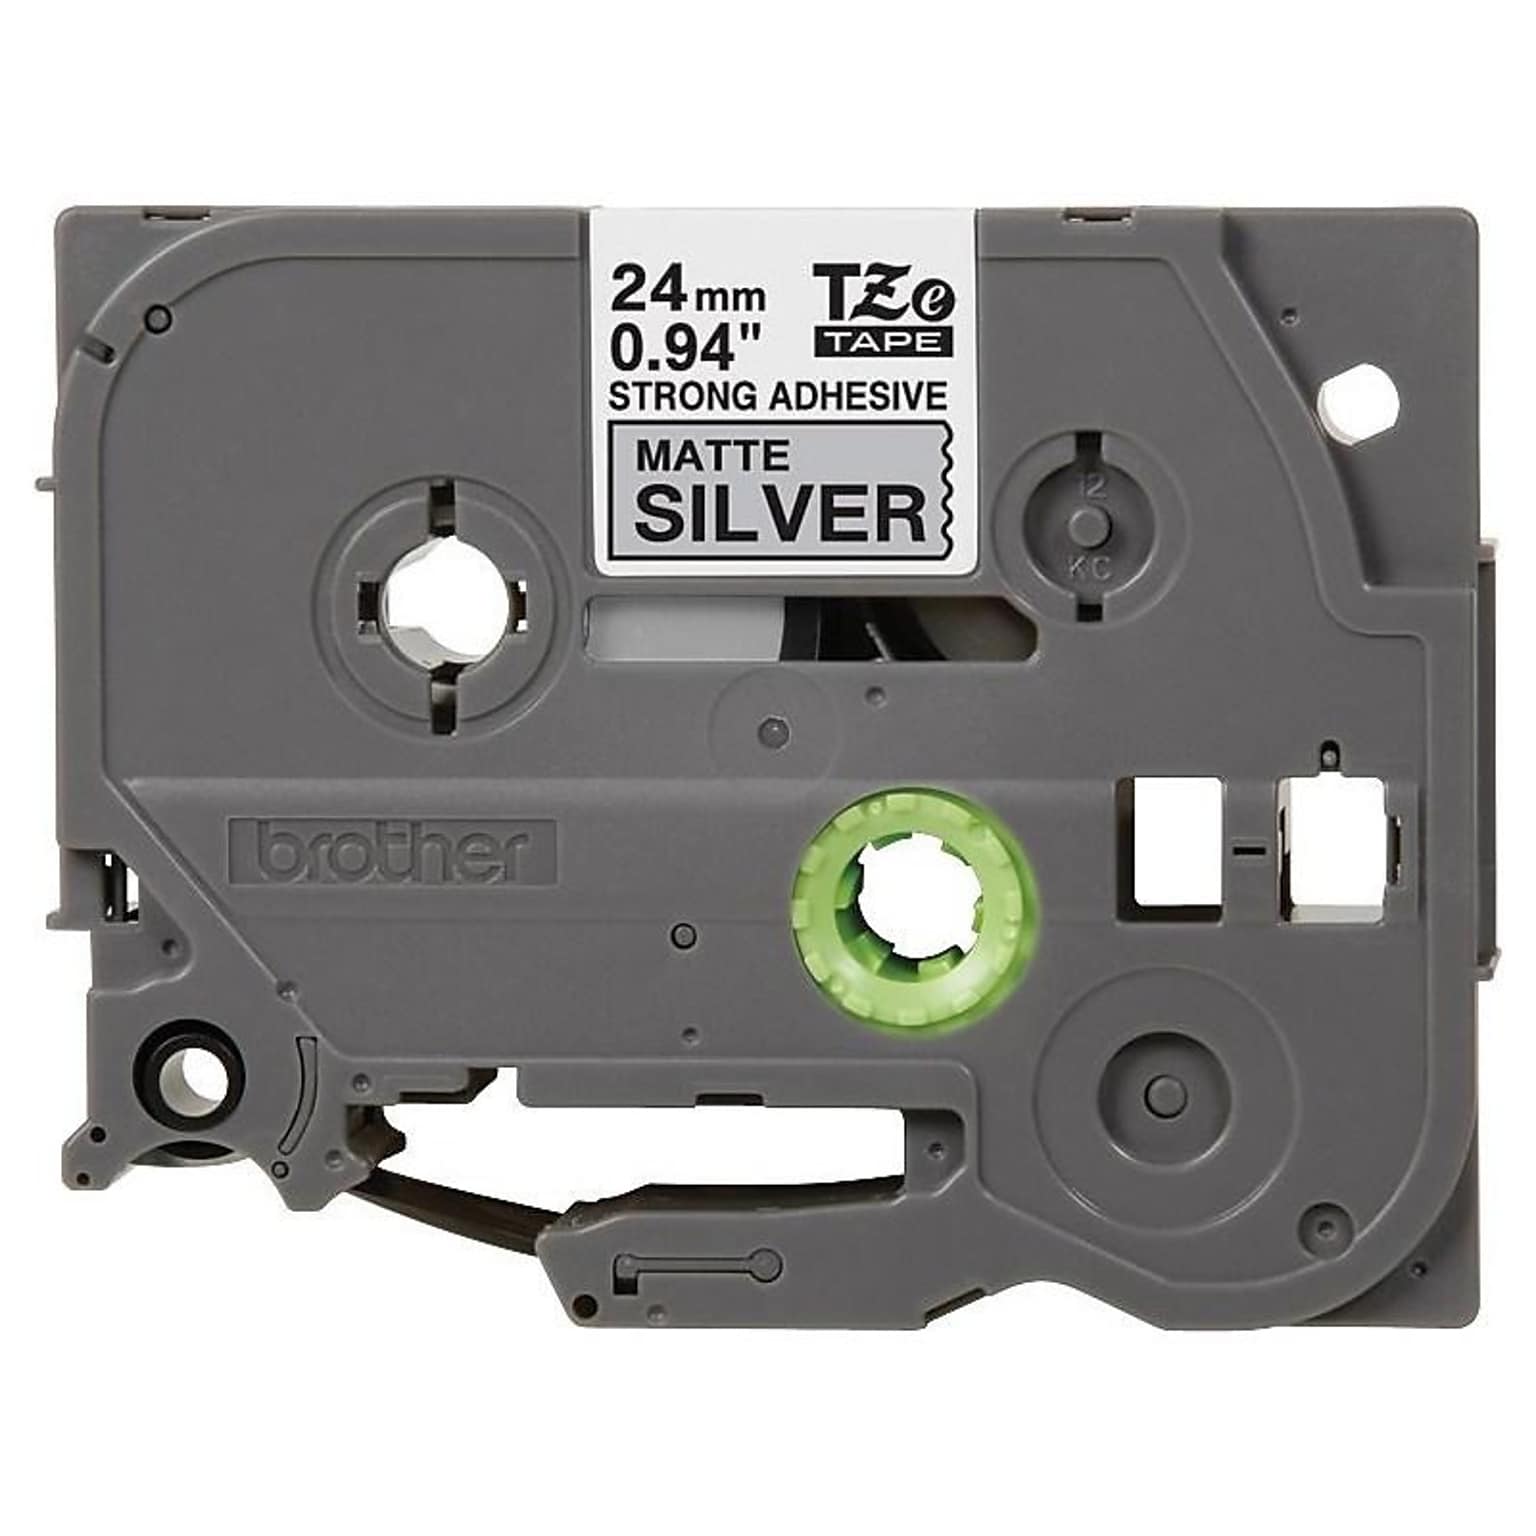 Brother P-touch TZe-S951 Laminated Extra Strength Label Maker Tape, 1 x 26-2/10, Black on Matte Silver (TZe-S951)